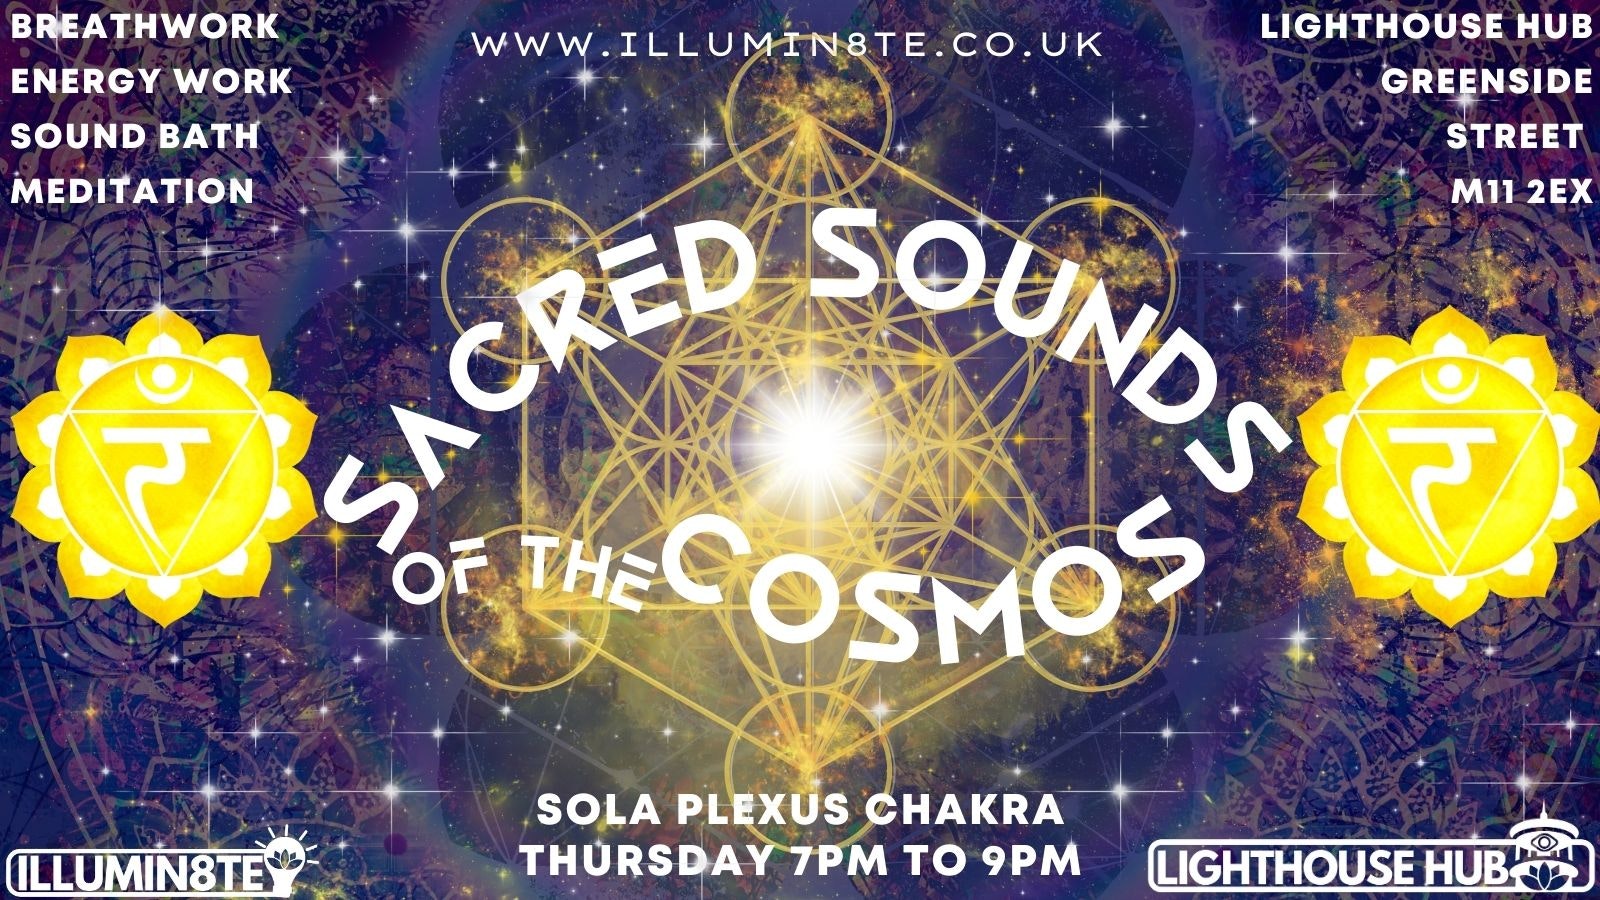 Illumin8te | Sacred Sounds Of The Cosmos | Sound Bath  (Thursday 26th April) @ THE LIGHTHOUSE 7pm